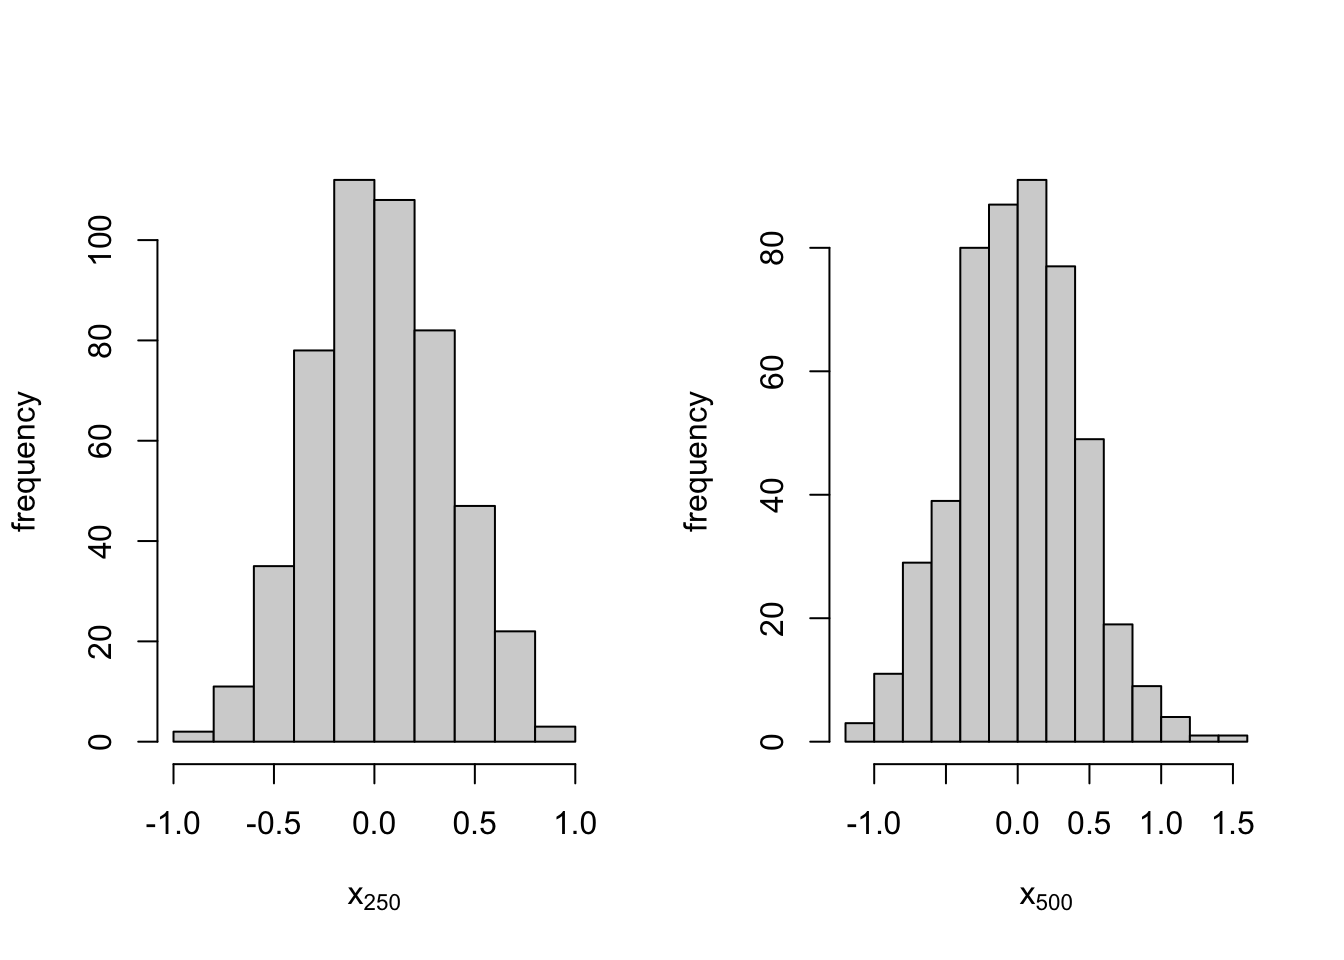 Histograms of posterior samples of the latent state for specific time points, t = 250 and t = 500, from the AR(1) model with level plus noise model.